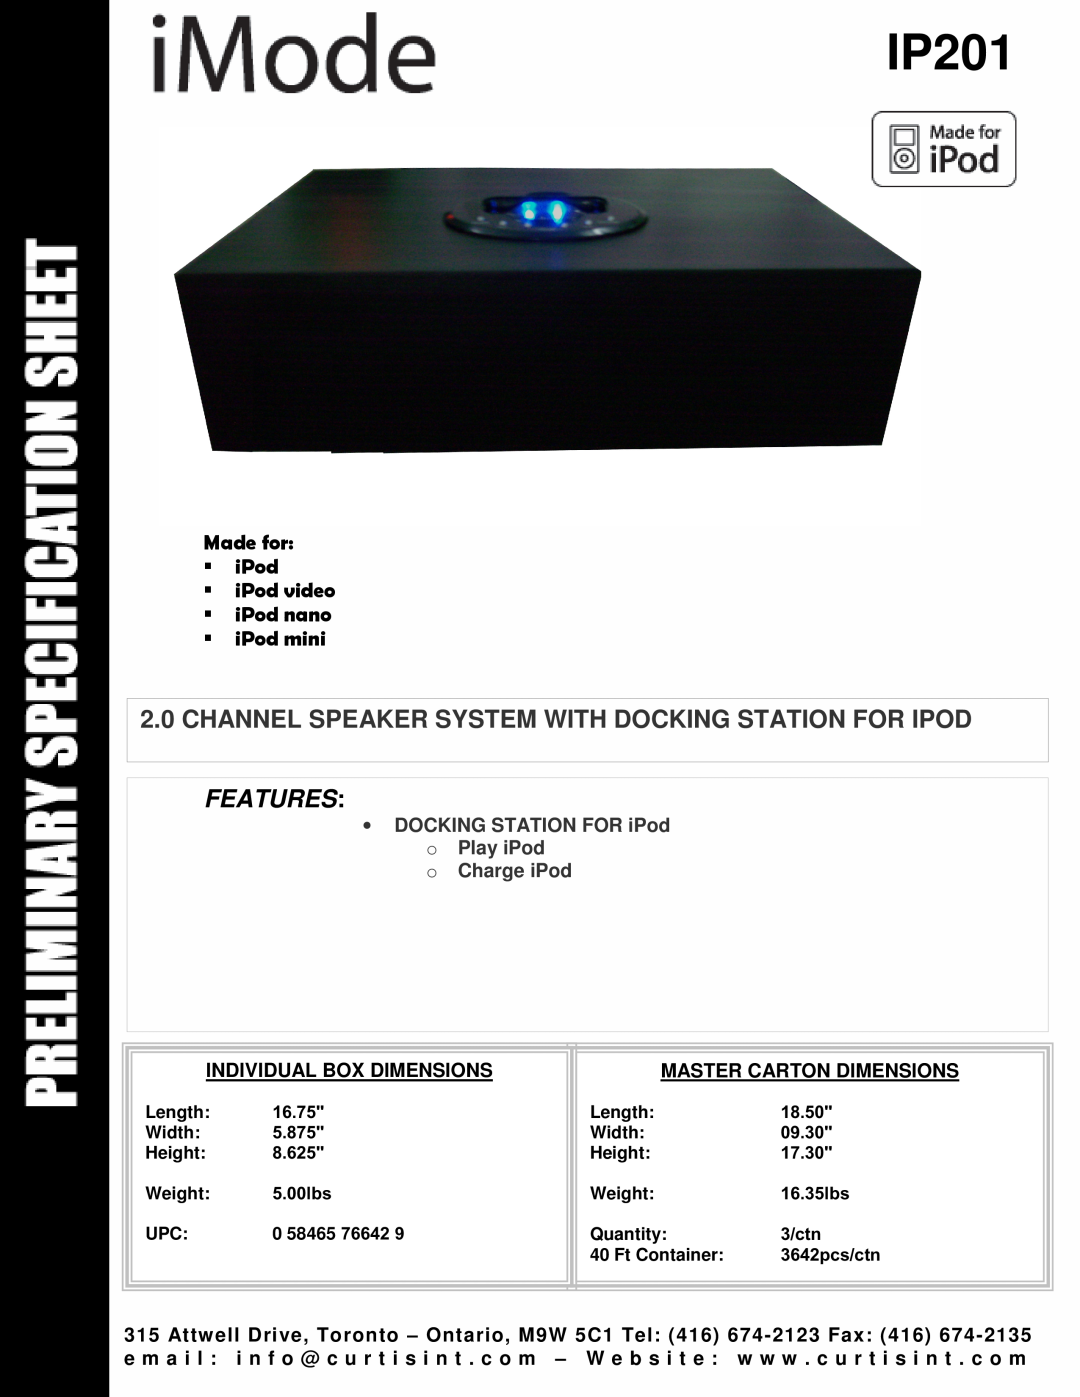 Curtis IP201 dimensions Channel Speaker System With Docking Station For Ipod, Features 